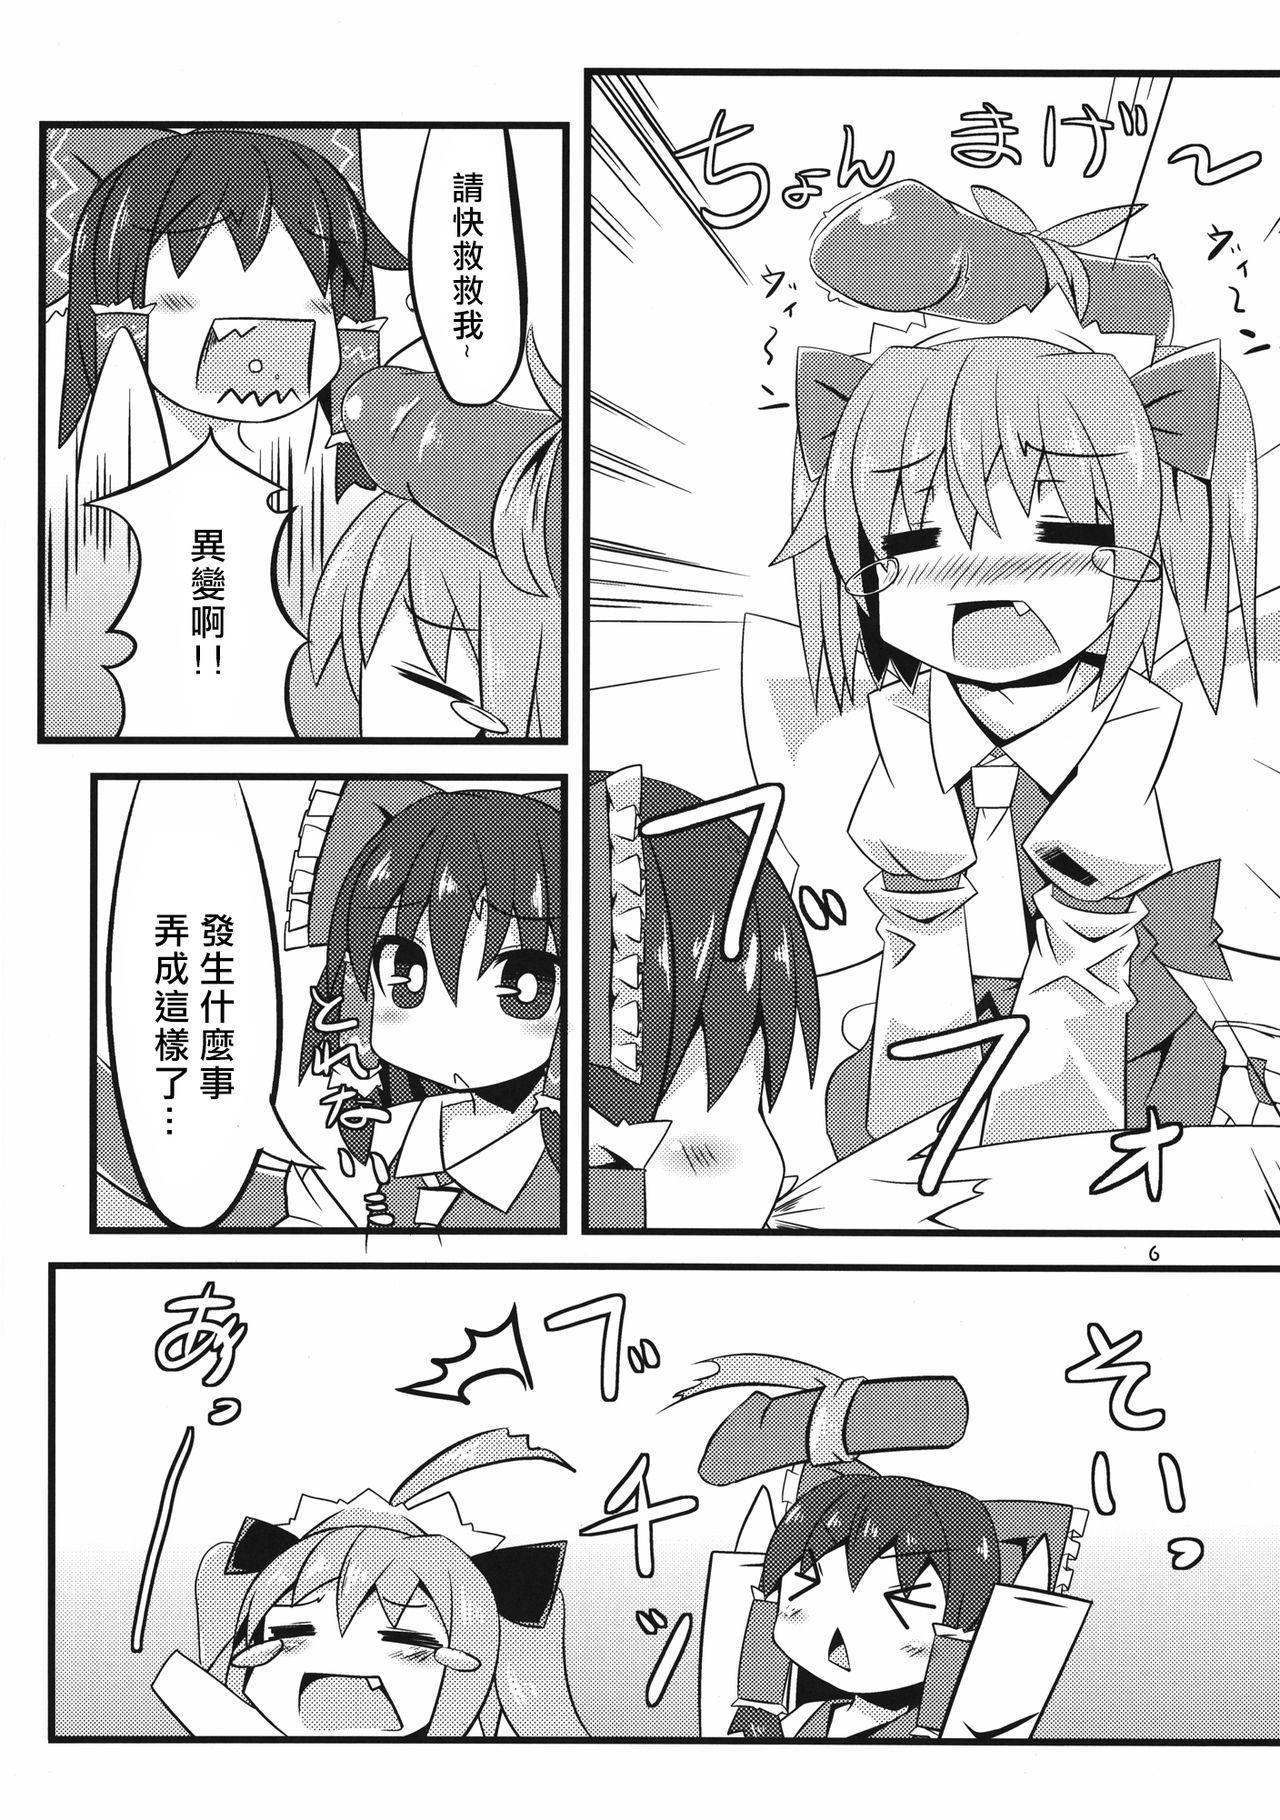 Pussysex Flan-chan to Asobo!! - Touhou project Sexteen - Page 6